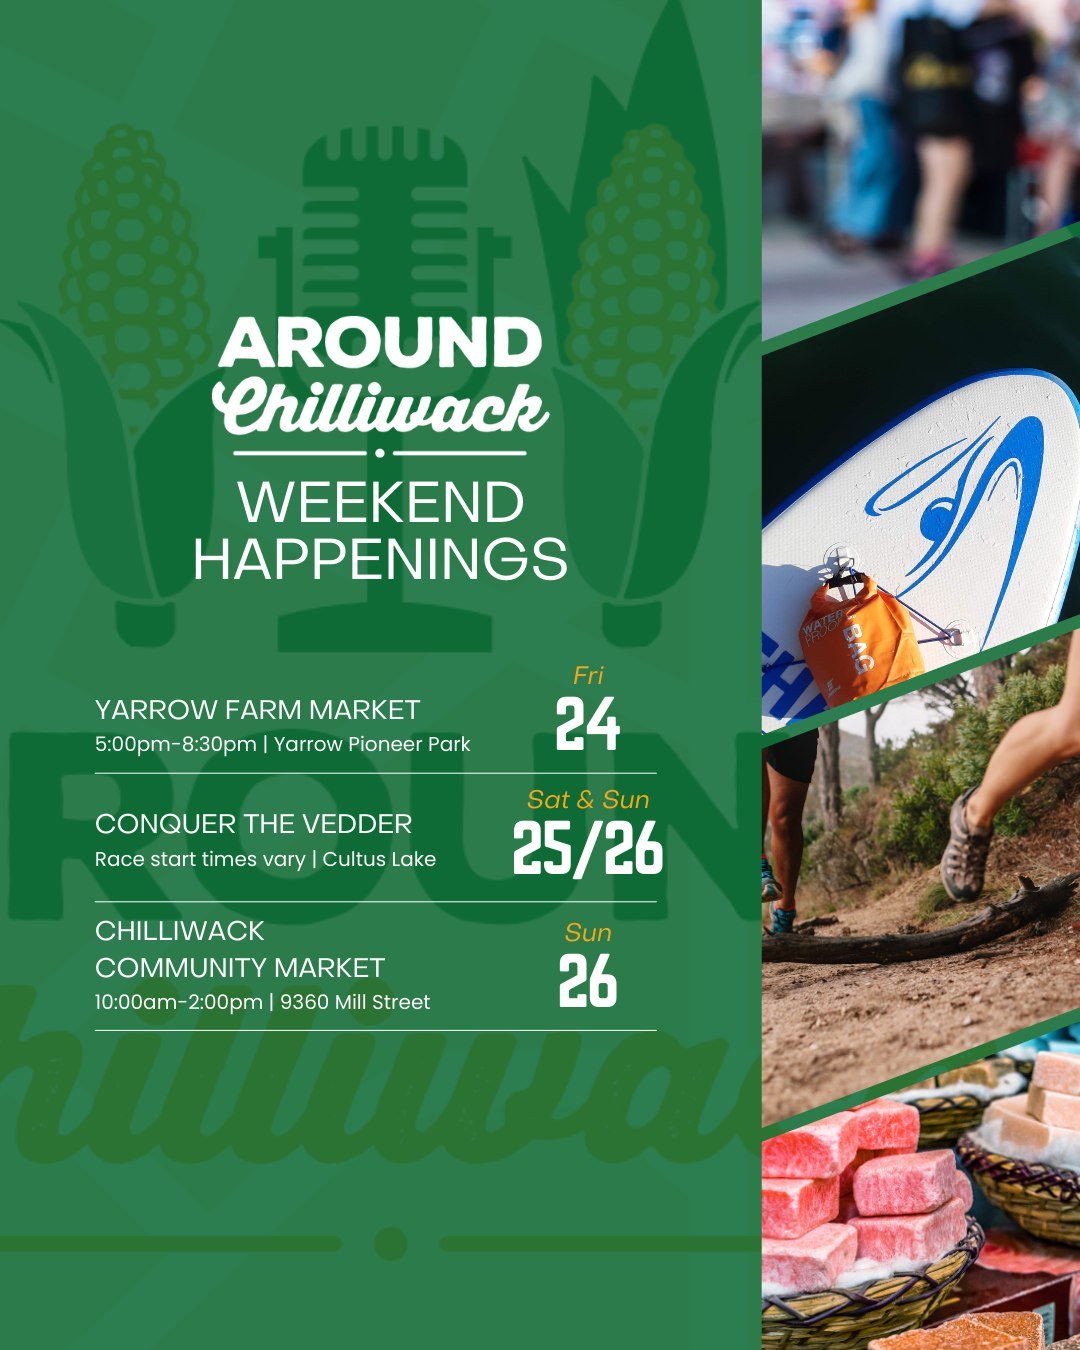 Don't miss out on these fun events happening this weekend #AroundChilliwack 😁

🌼Yarrow Farm Market - Opening day is TODAY!  Located in Yarrow Pioneer Park, the Yarrow Farm Market runs from 5pm-8:30pm every Friday from now until September 27th.  The